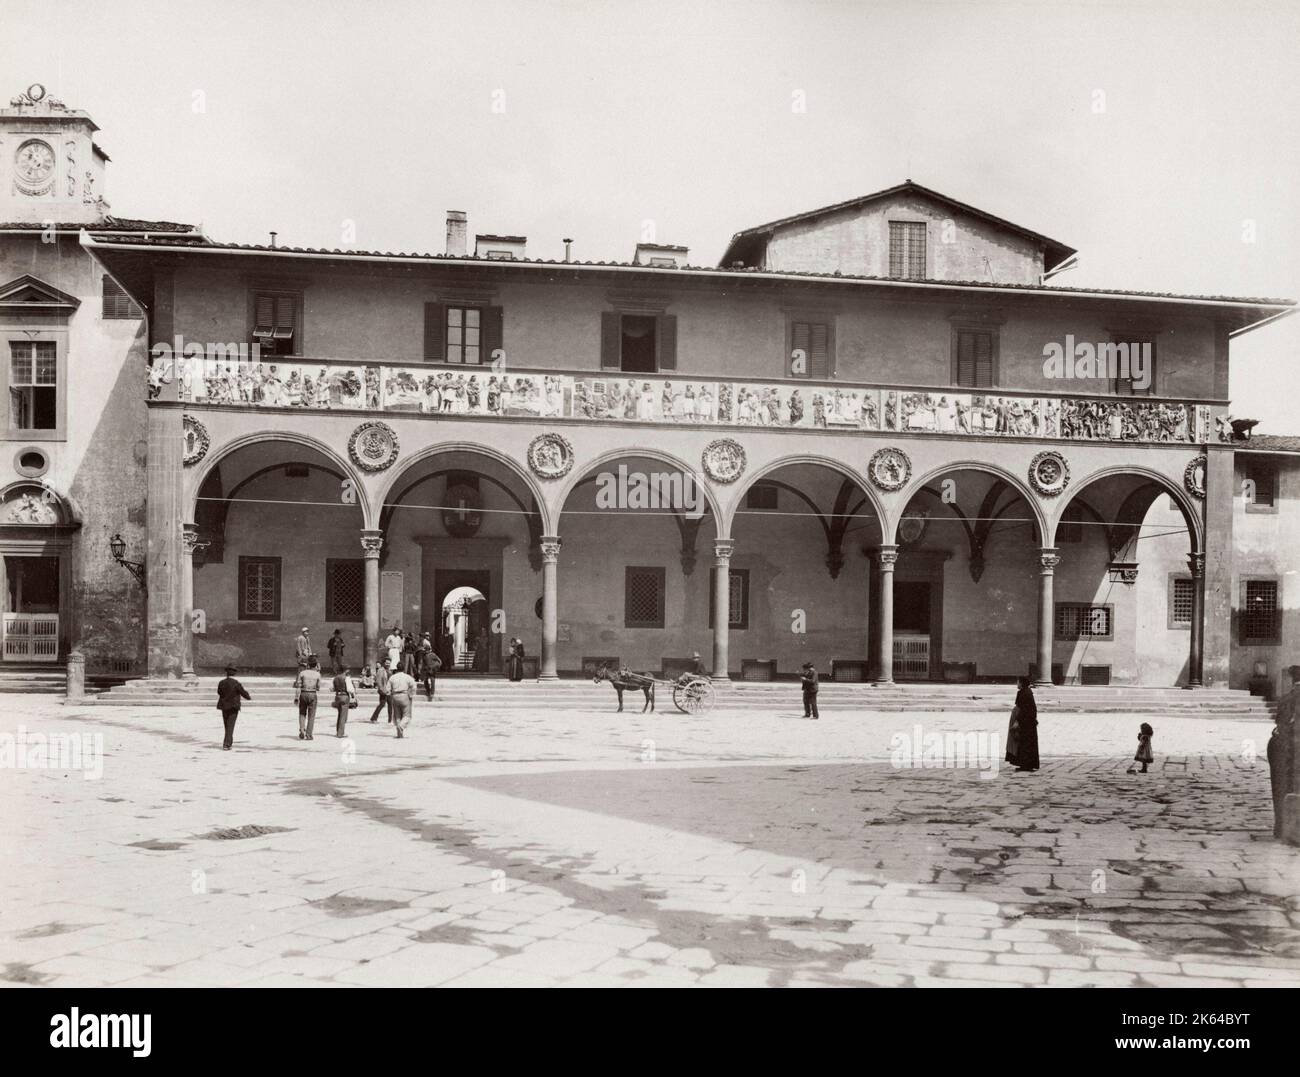 19th century vintage photograph - Ospedale del Ceppo is a medieval hospital founded in 1277 in Pistoia, Tuscany, central Italy. Stock Photo